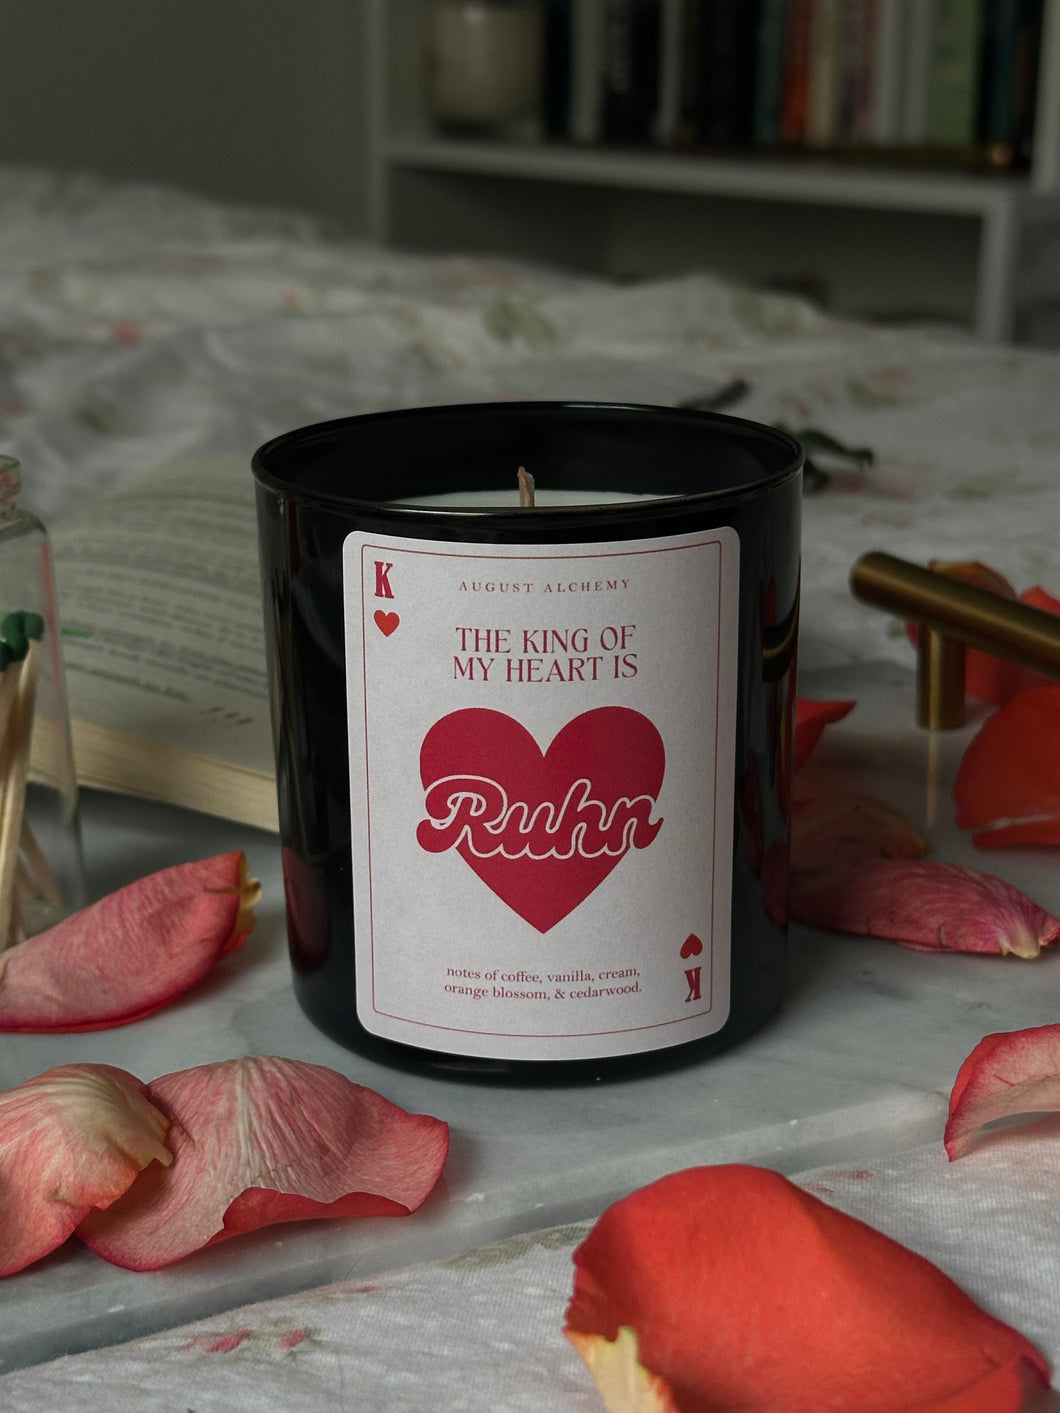 Ruhn is the KOMH Candle